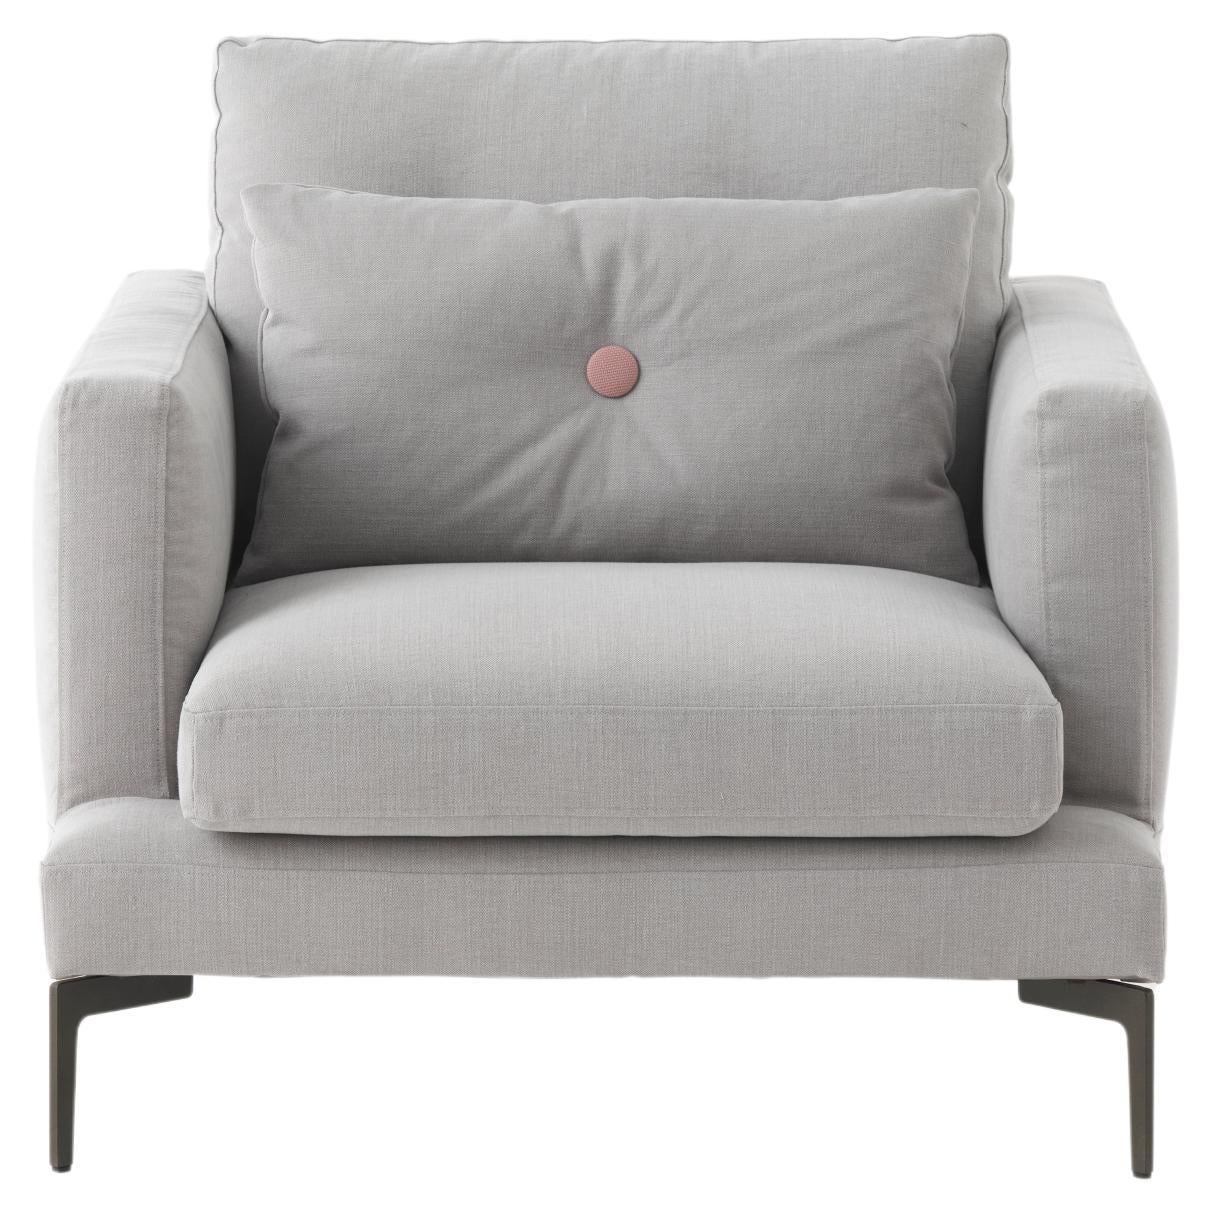 Essentiel Large Armchair with Cushion in Creta Grey Upholstery by Sergio Bicego